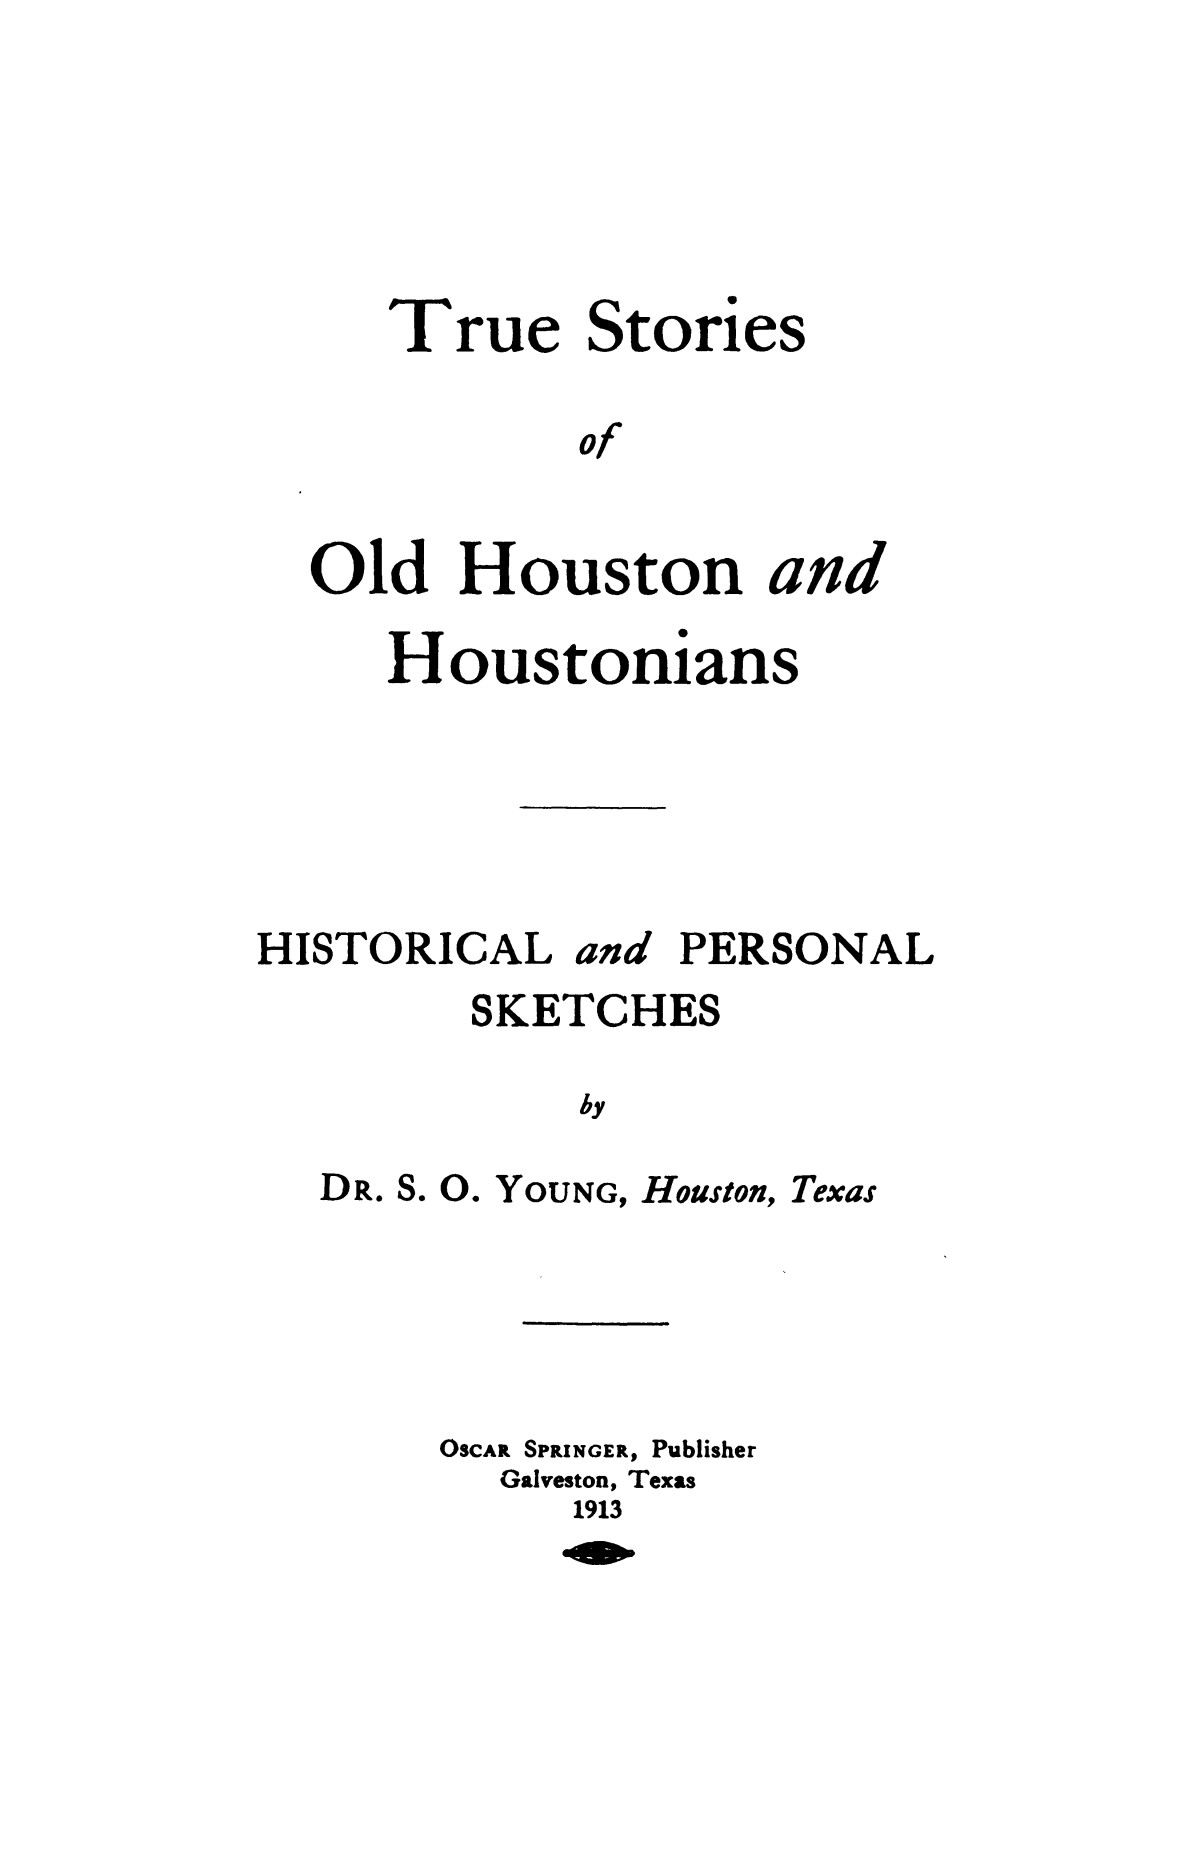 True stories of old Houston and Houstonians: historical and personal sketches / by S. O. Young.
                                                
                                                    1
                                                